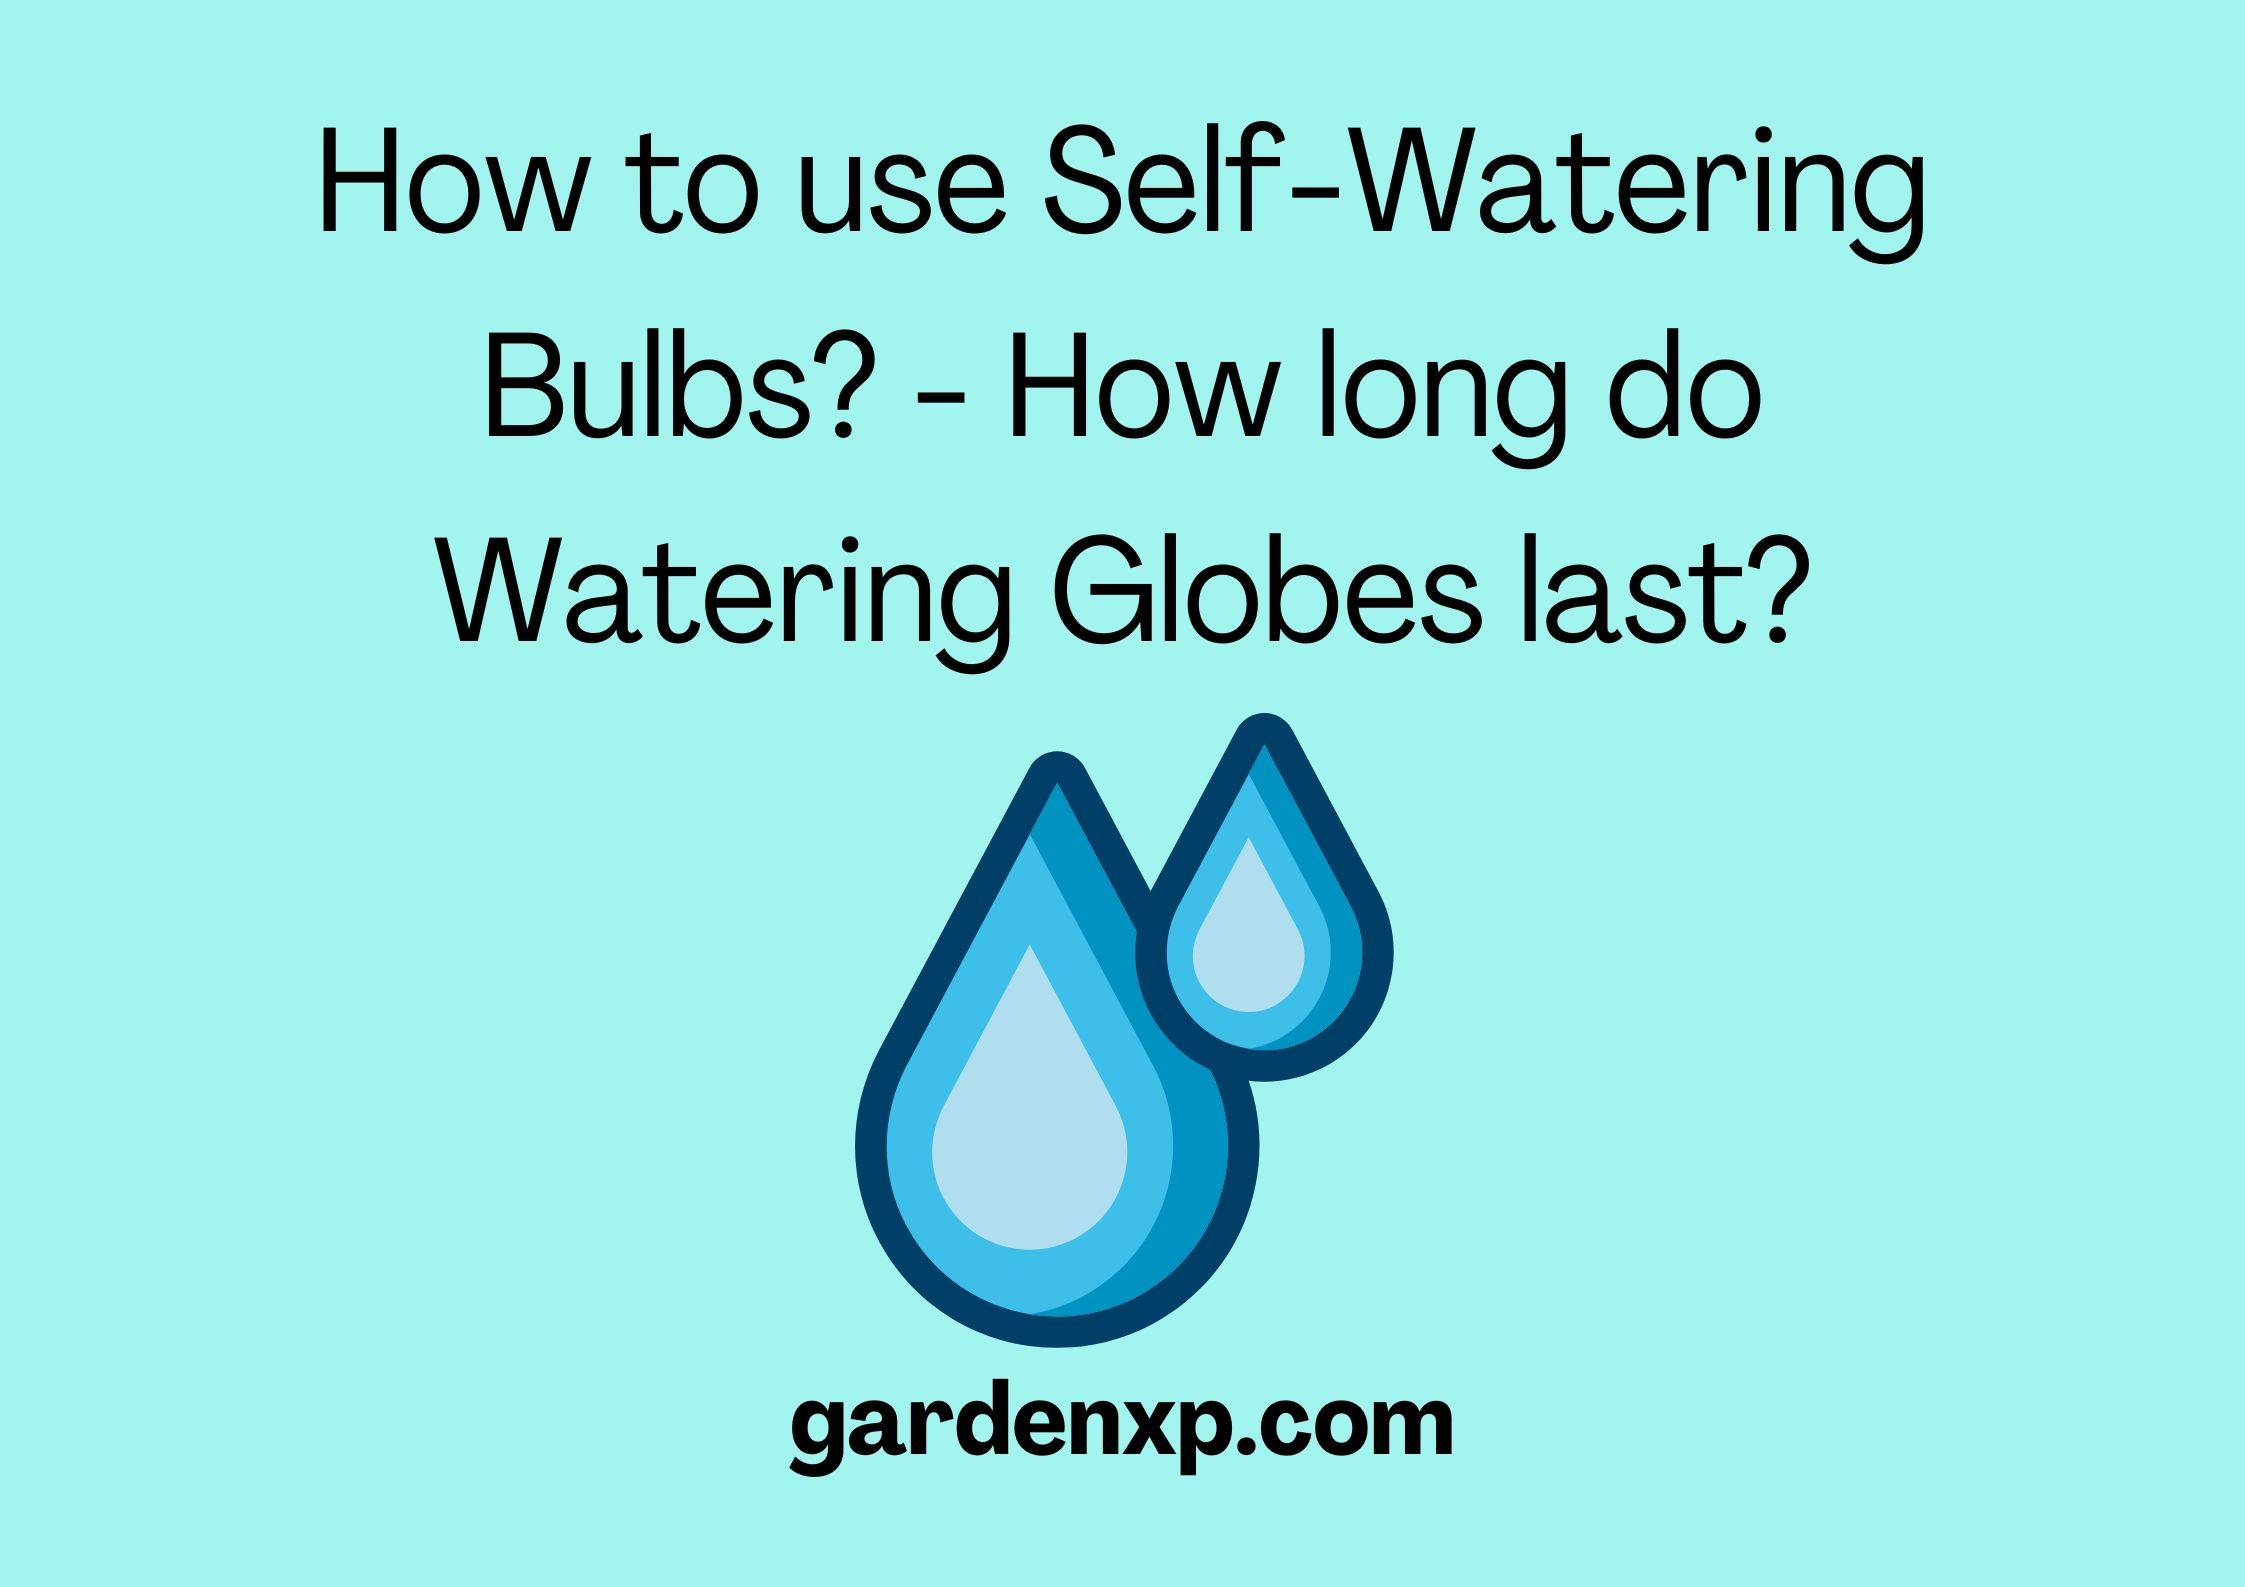 How to use Self-Watering Bulbs? - How long do Watering Globes last?